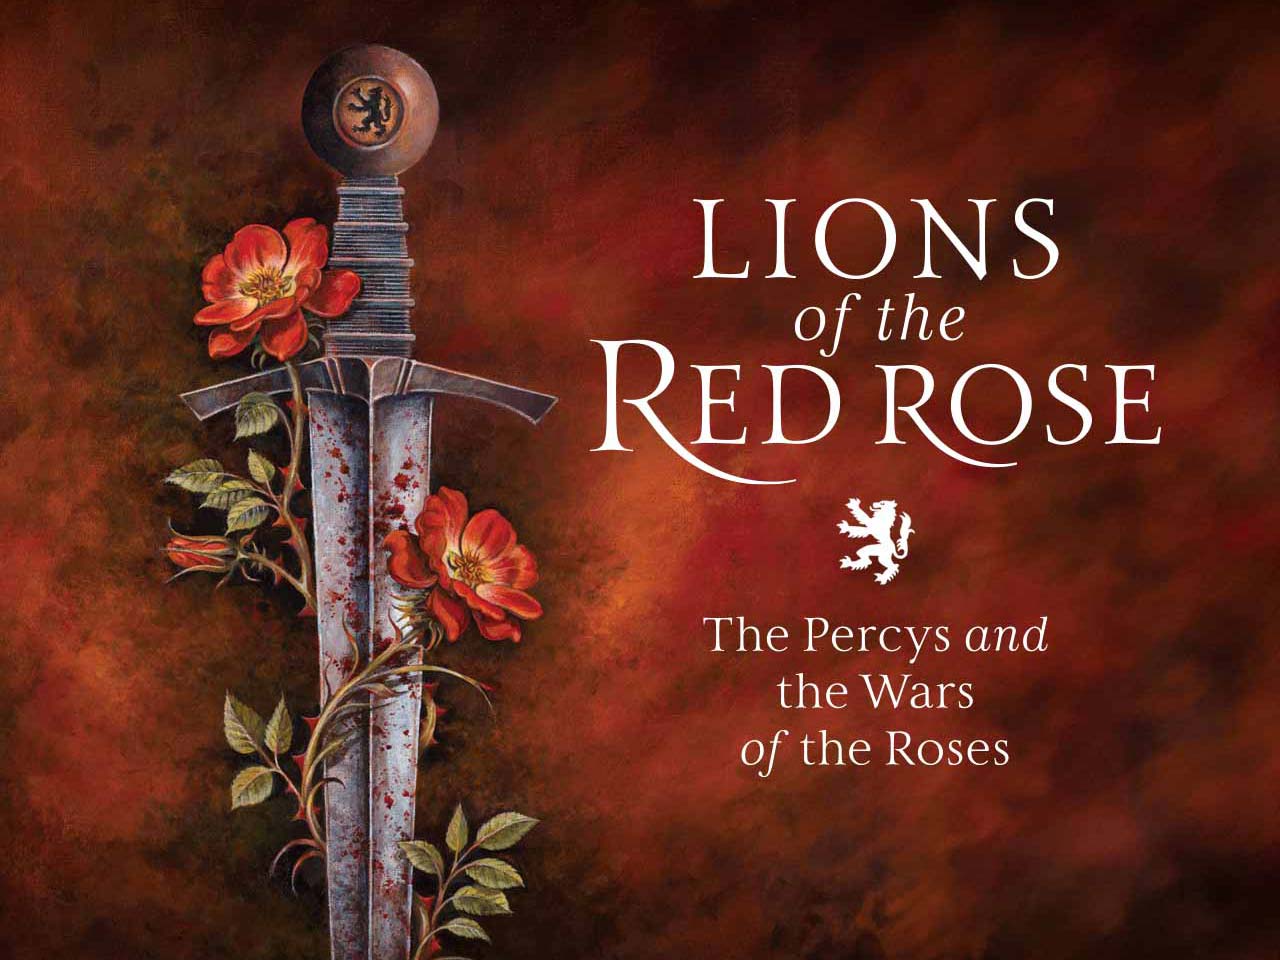 Lions of the Red Rose Design and Production